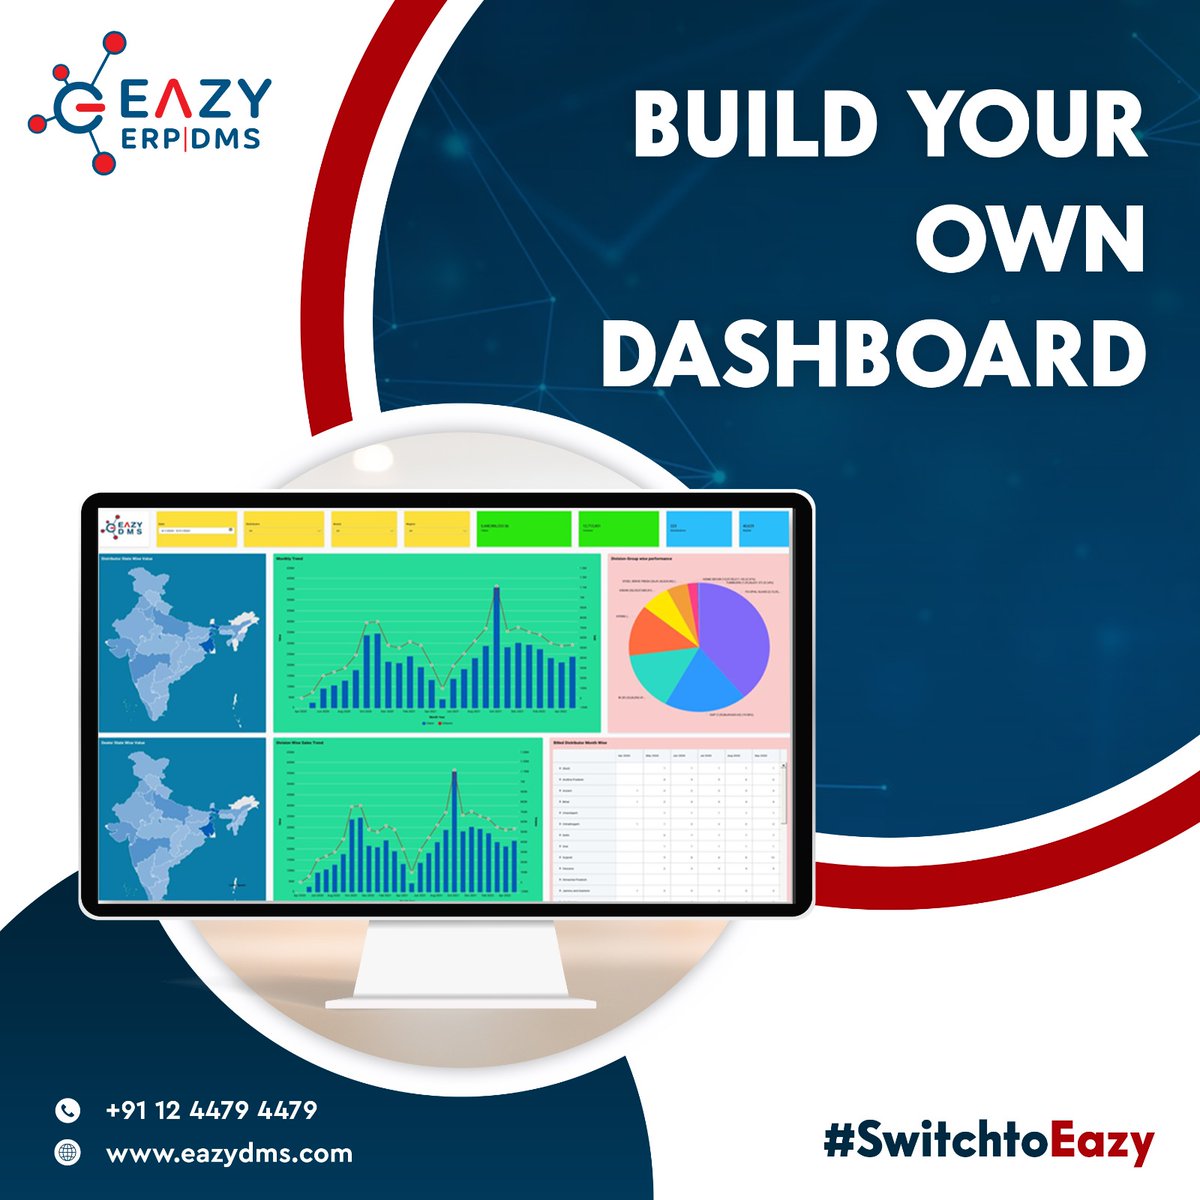 Everyone has their own way of evaluating data.
What sets us apart is the ability to build and modify our own dashboard according to our needs.

Don't believe it?
Check it out yourself by booking a FREE Demo!

#SwitchToEazy

#sfa #salesforceautomation #recibotech #eazyerp